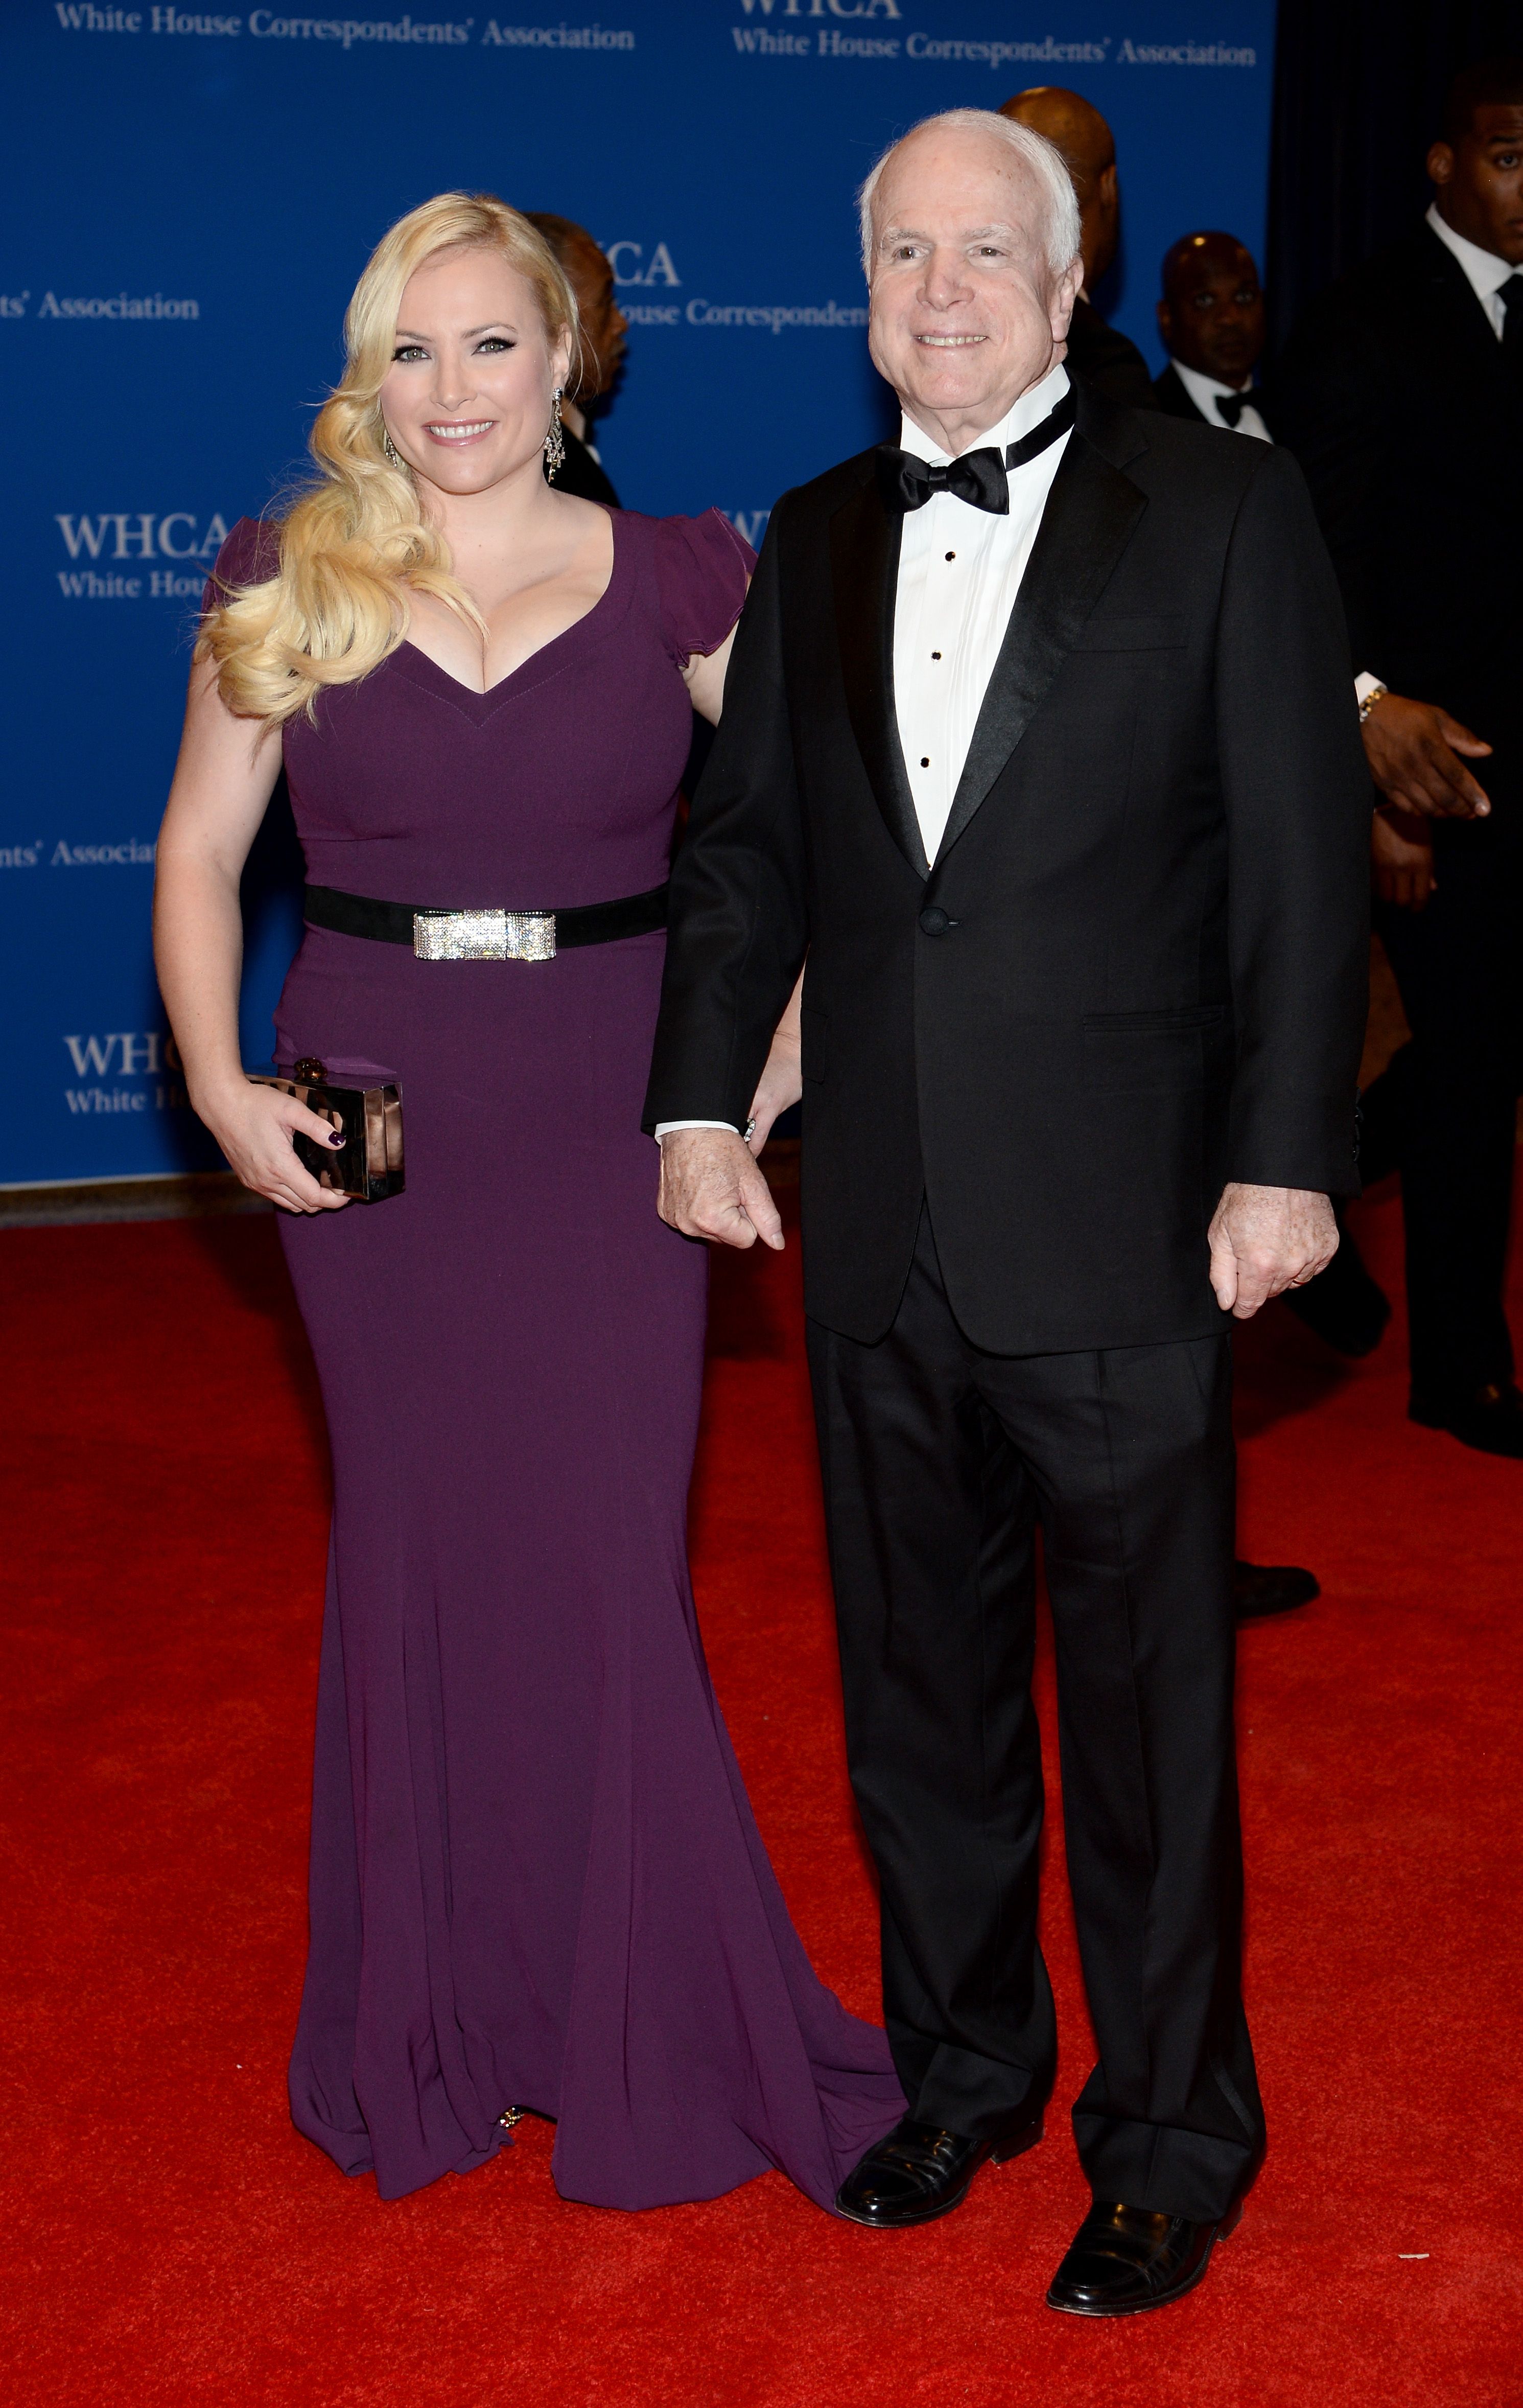 Megan McCain and late Senator John McCain at the 100th Annual White House Correspondents' Association Dinner at the Washington Hilton on May 3, 2014 | Photo: Getty Images